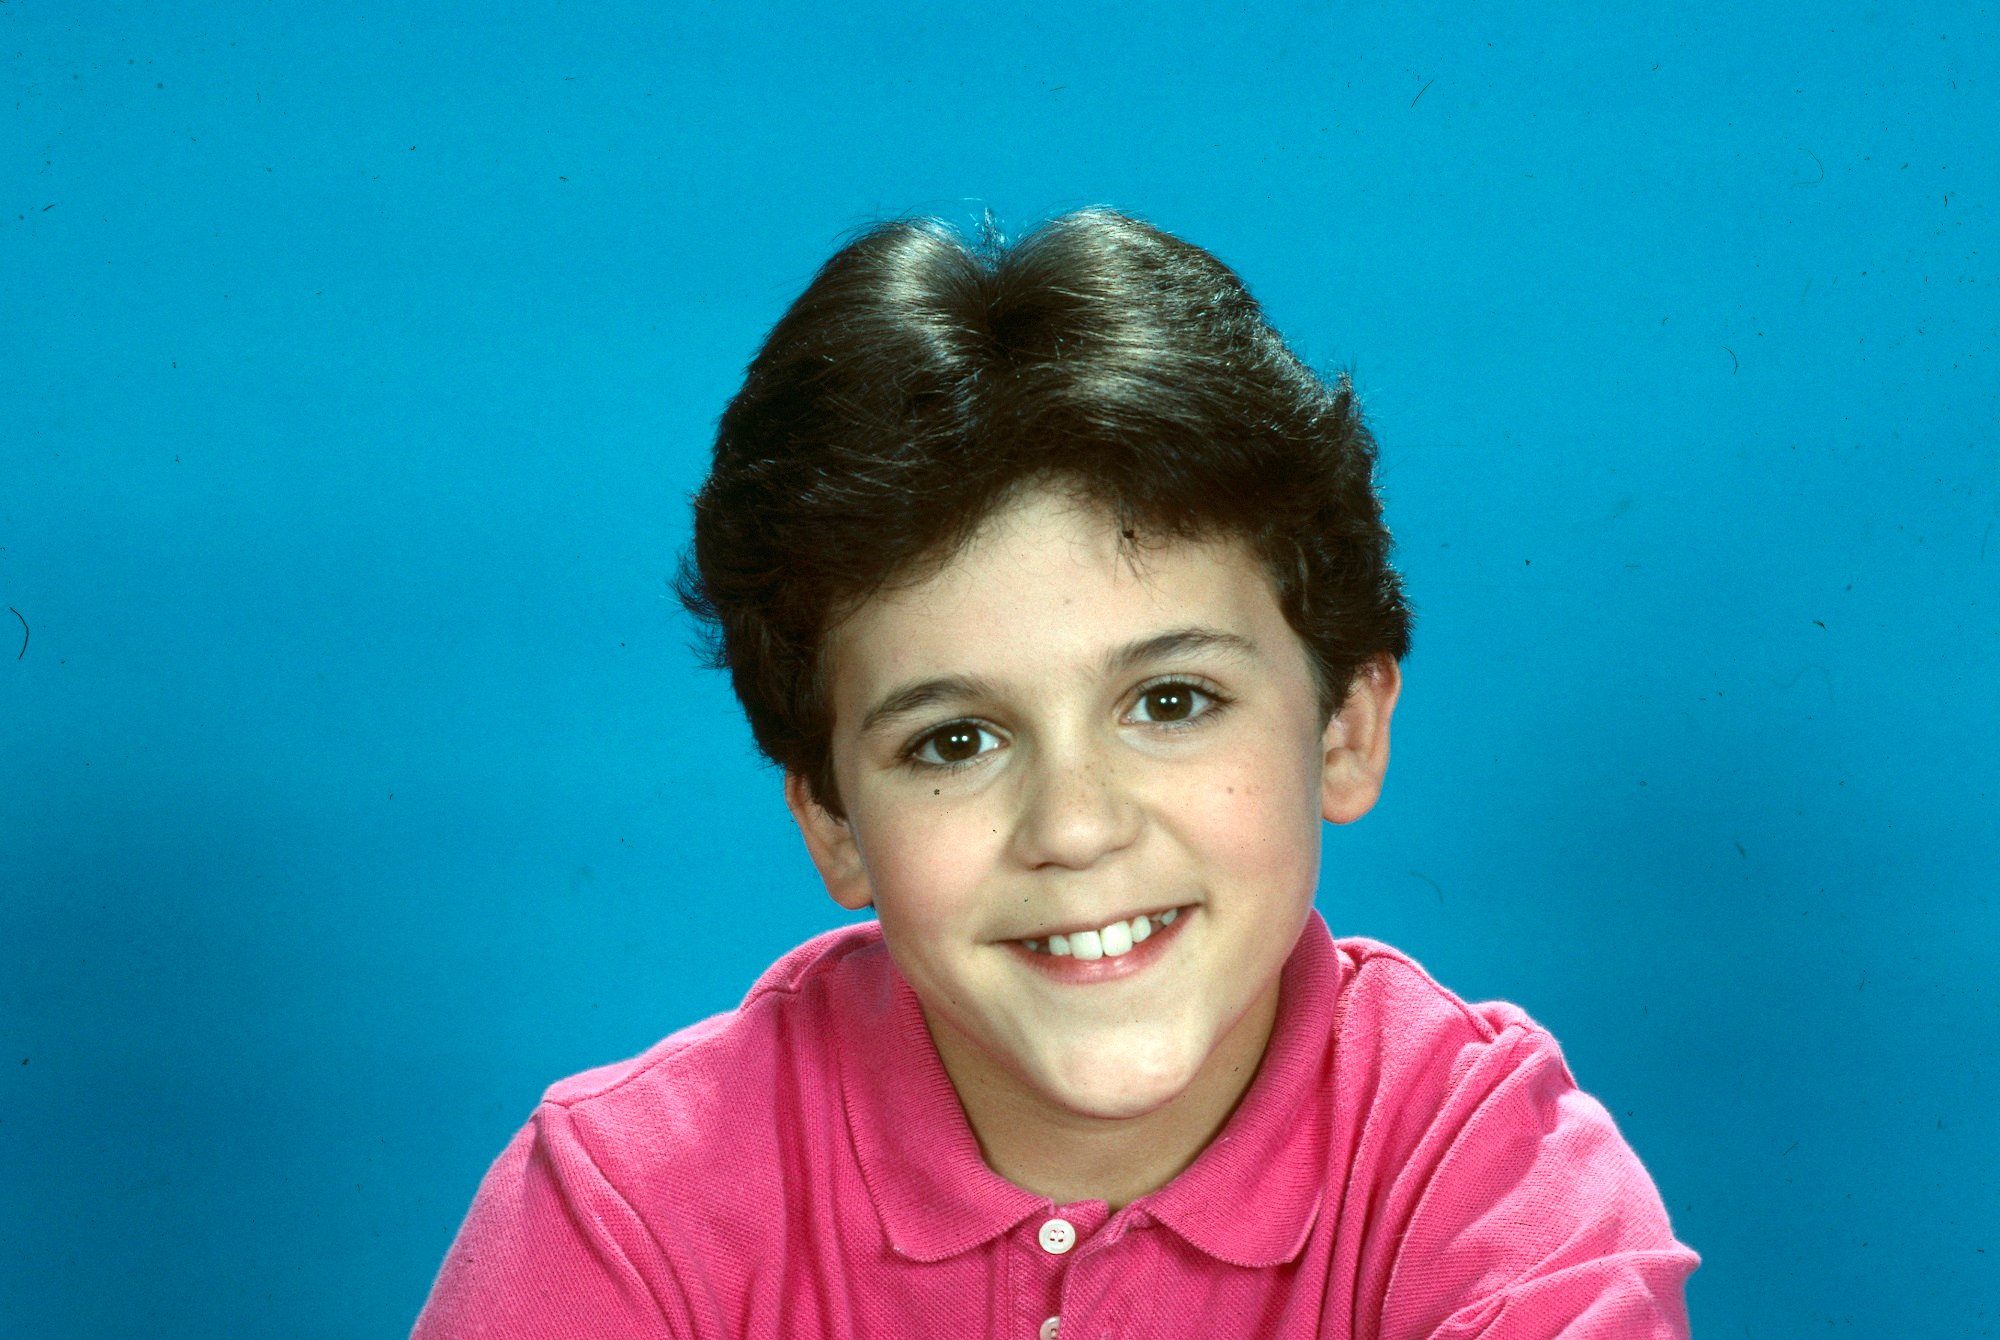 Fred Savage as a kid